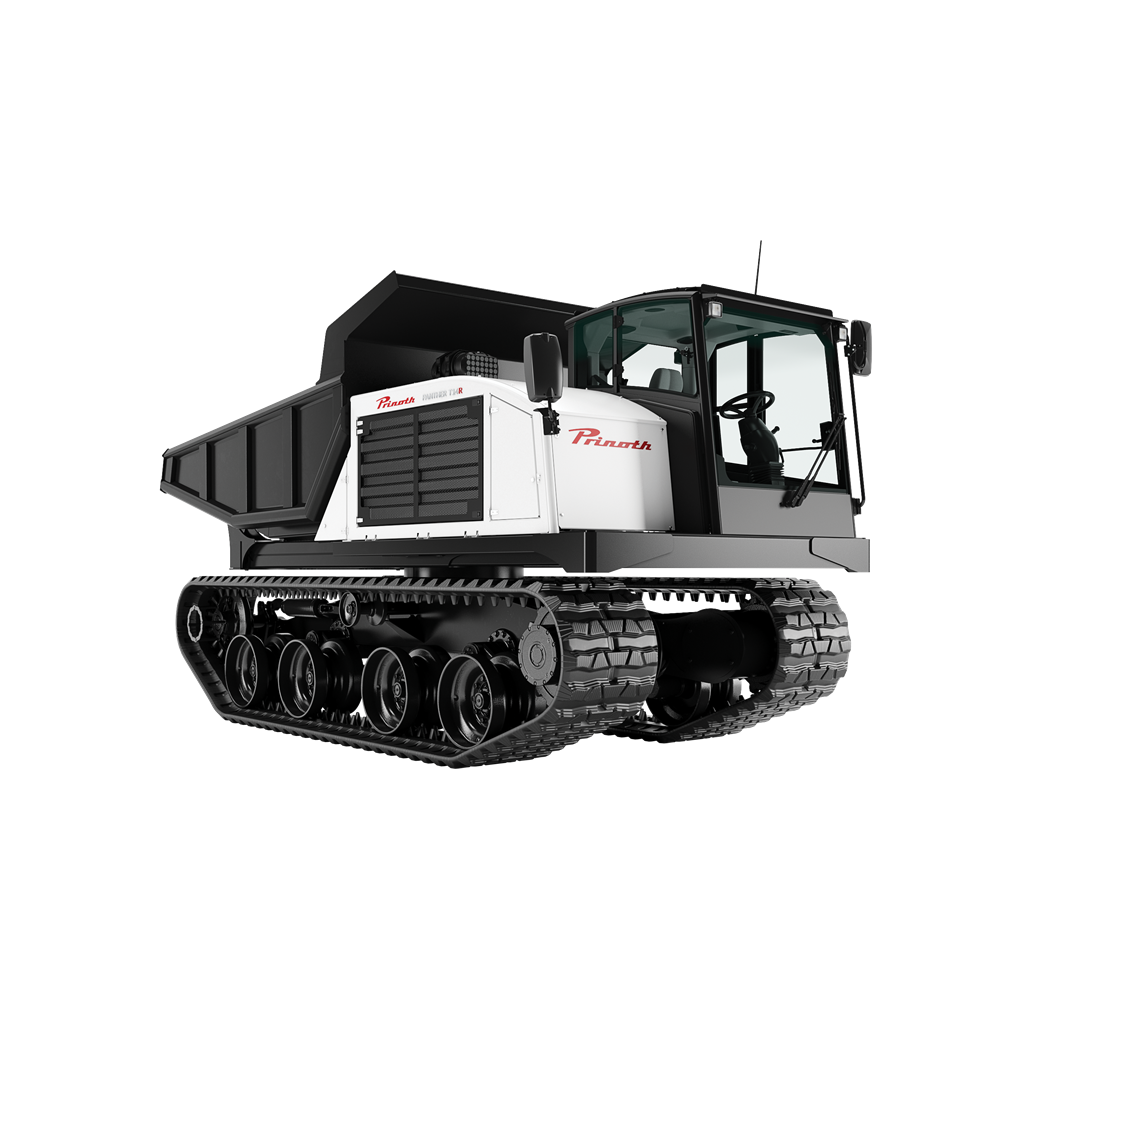 Prinoth's upgraded next generation Panther T14R rotating dumper